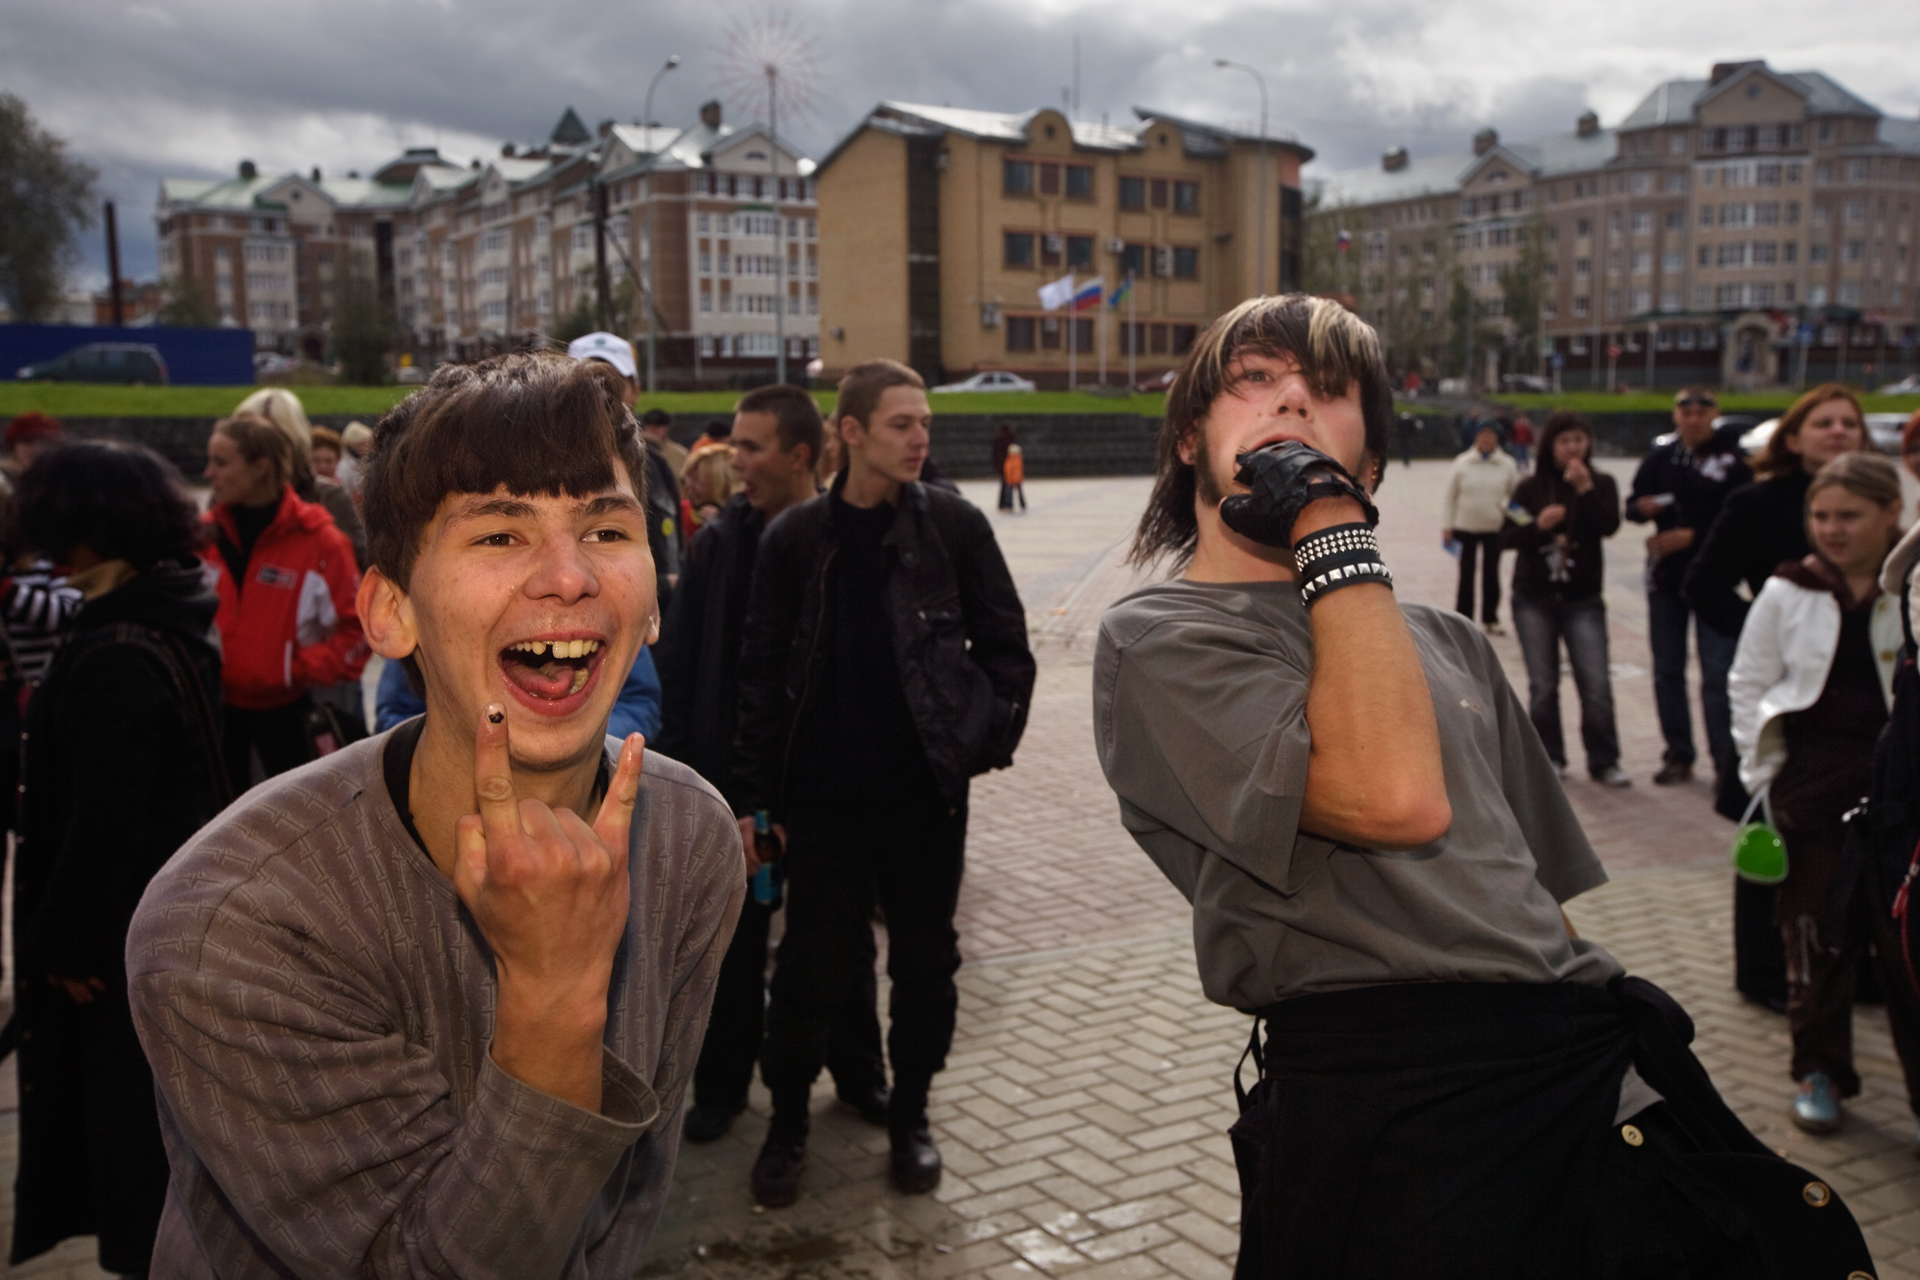  Boisterous teens gather in a square for festivities on City Day, a holiday honoring the metropolis and its citizens.  Khanty-Mansiysk, Russia  